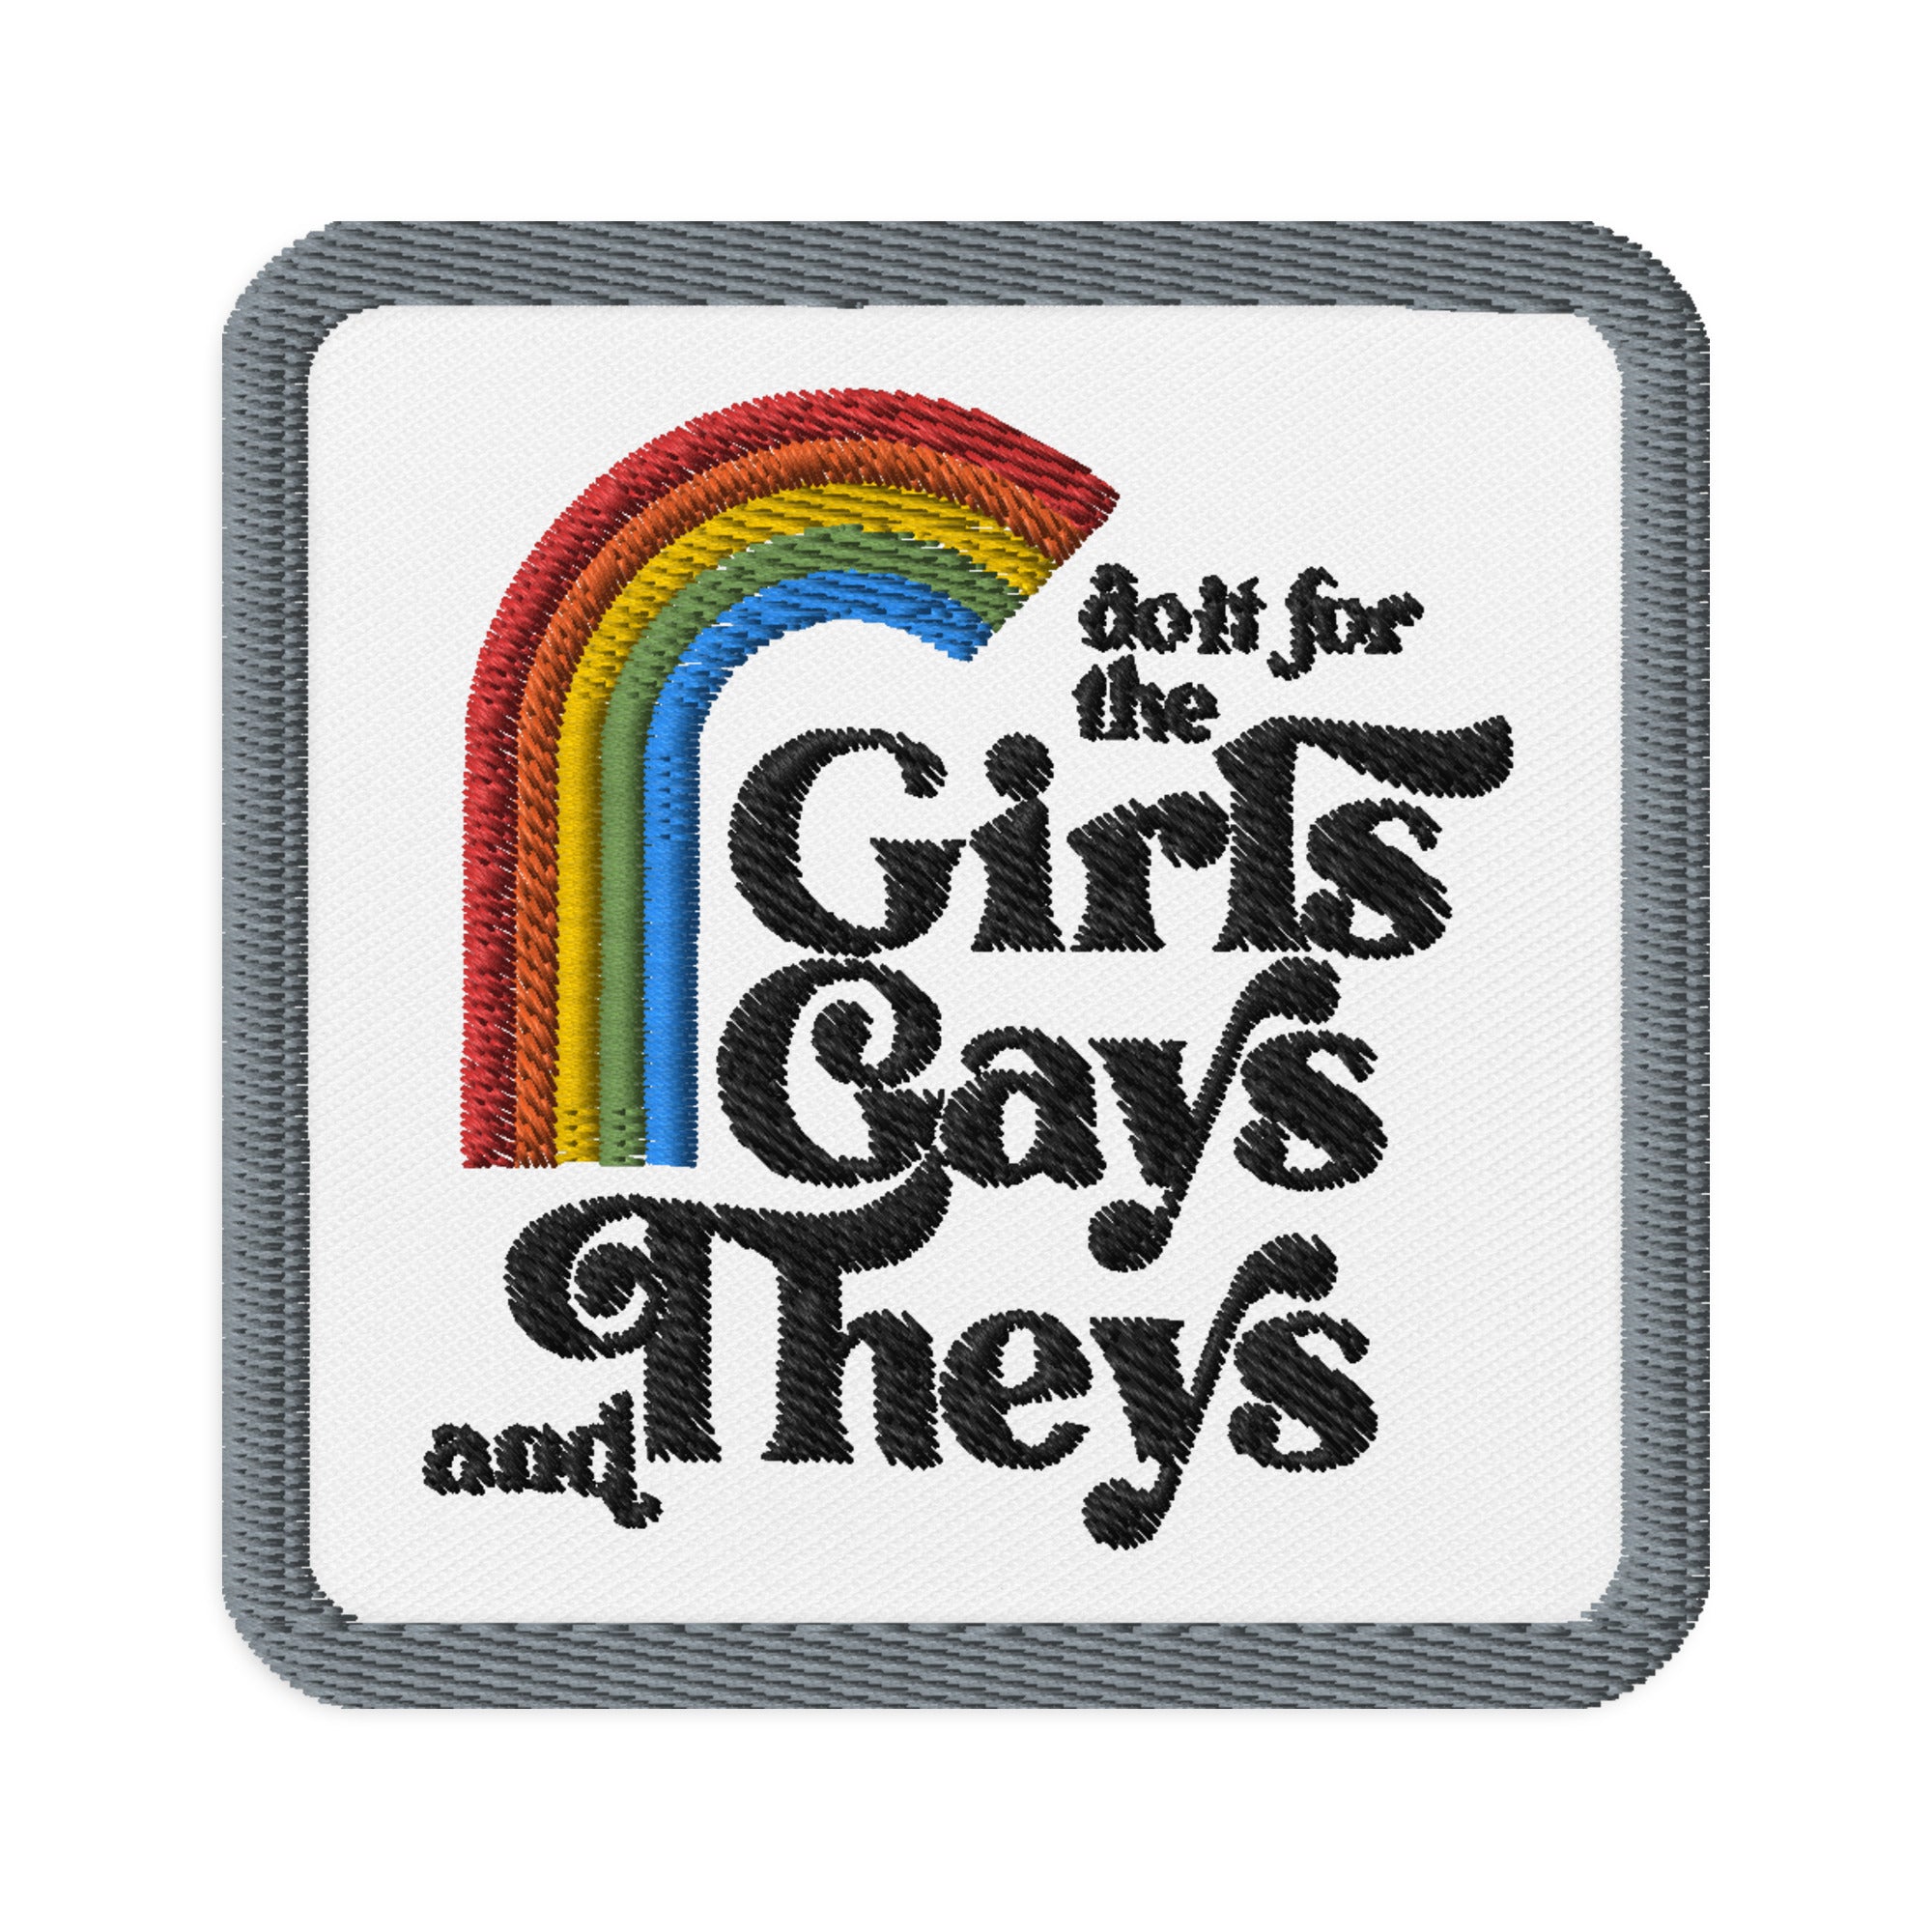 Do It For The GIrls, Gays, and Theys Patch